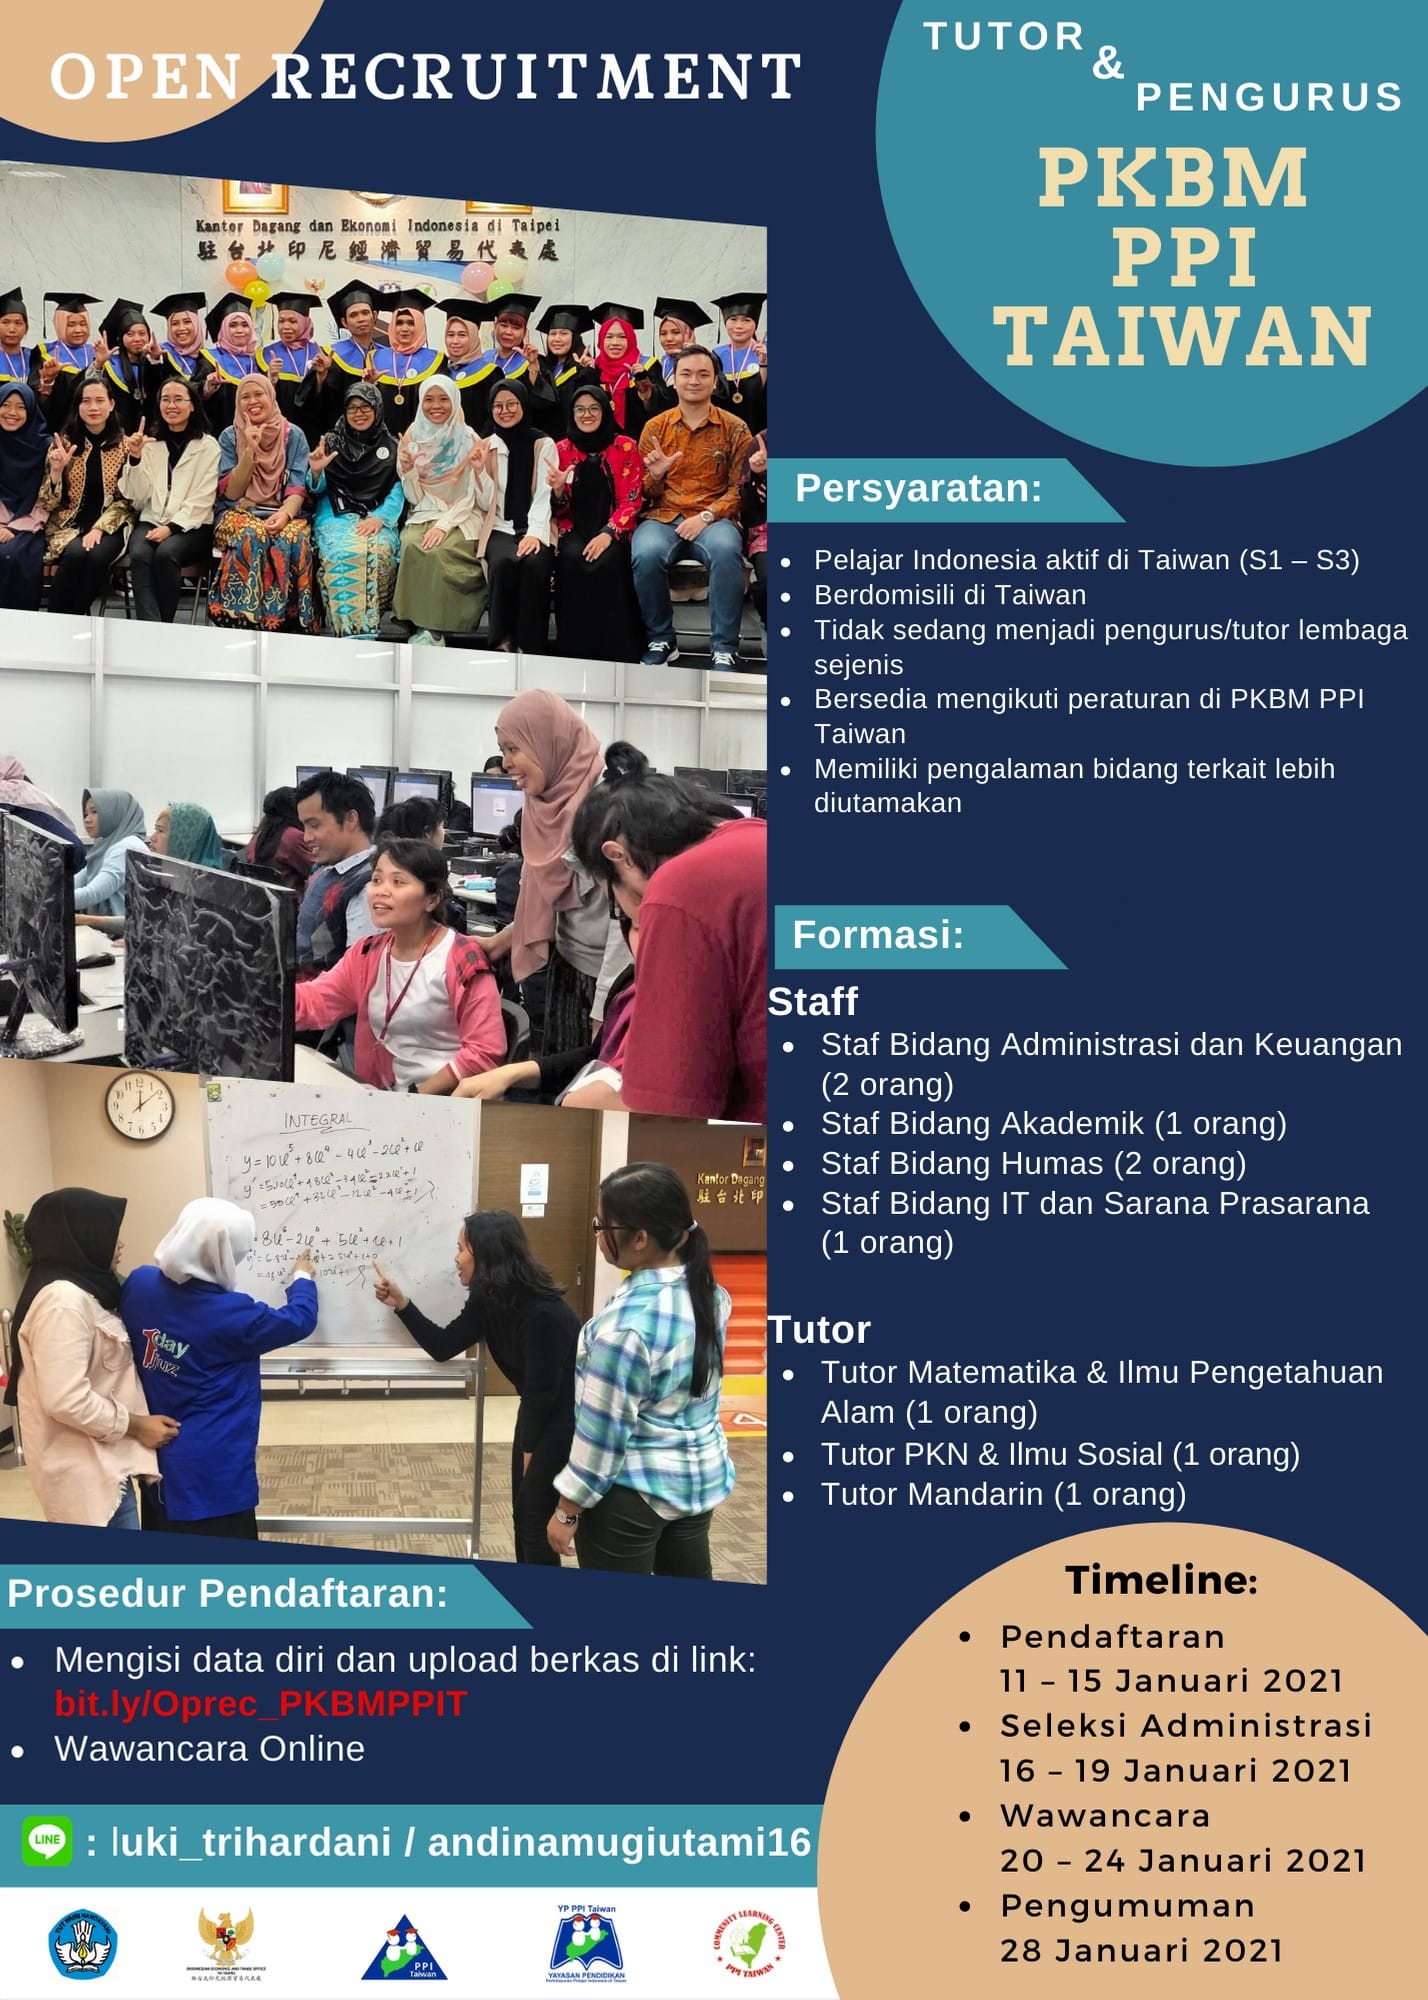 You are currently viewing Open Recruitment PKBM PPI Taiwan 2021